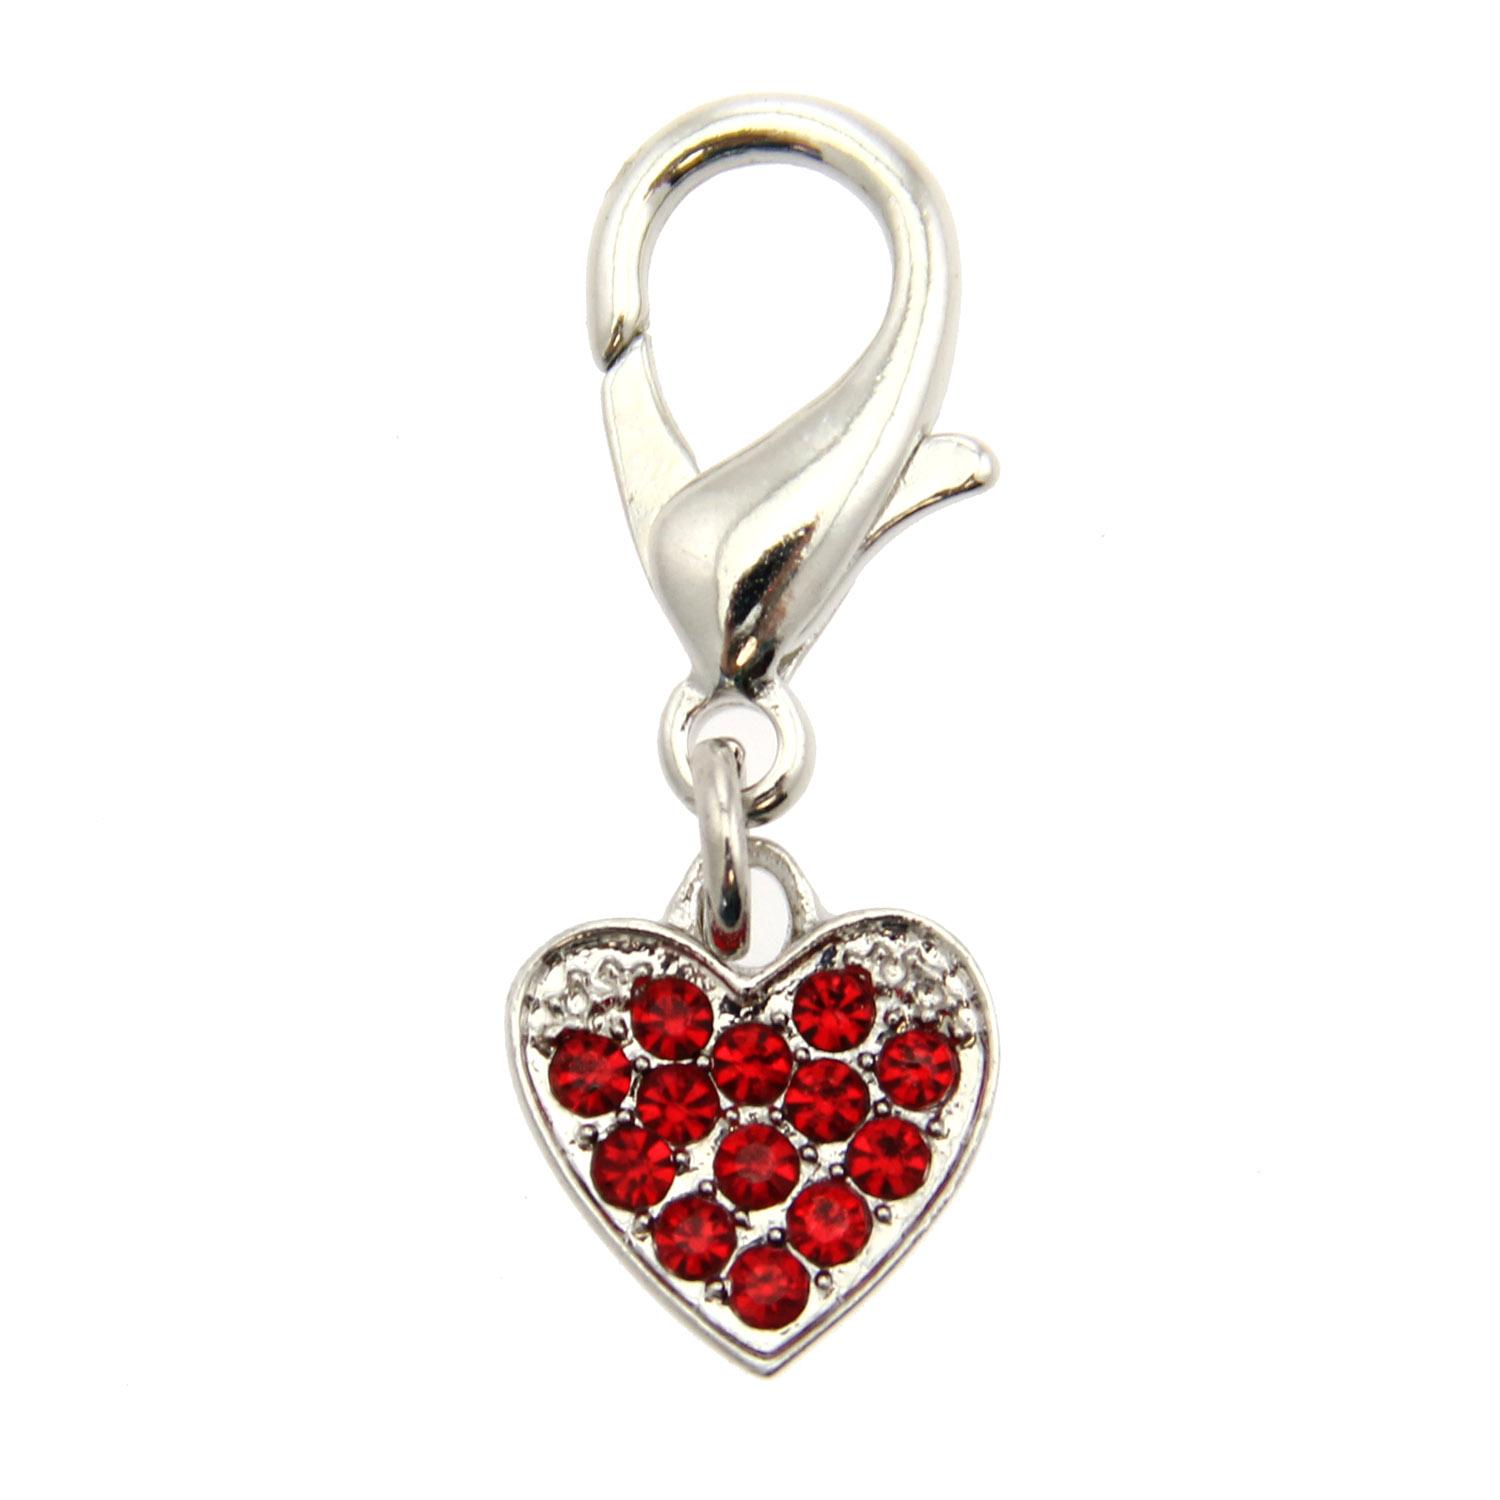 Basic Heart D-Ring Pet Collar Charm by FouFou Dog - Red